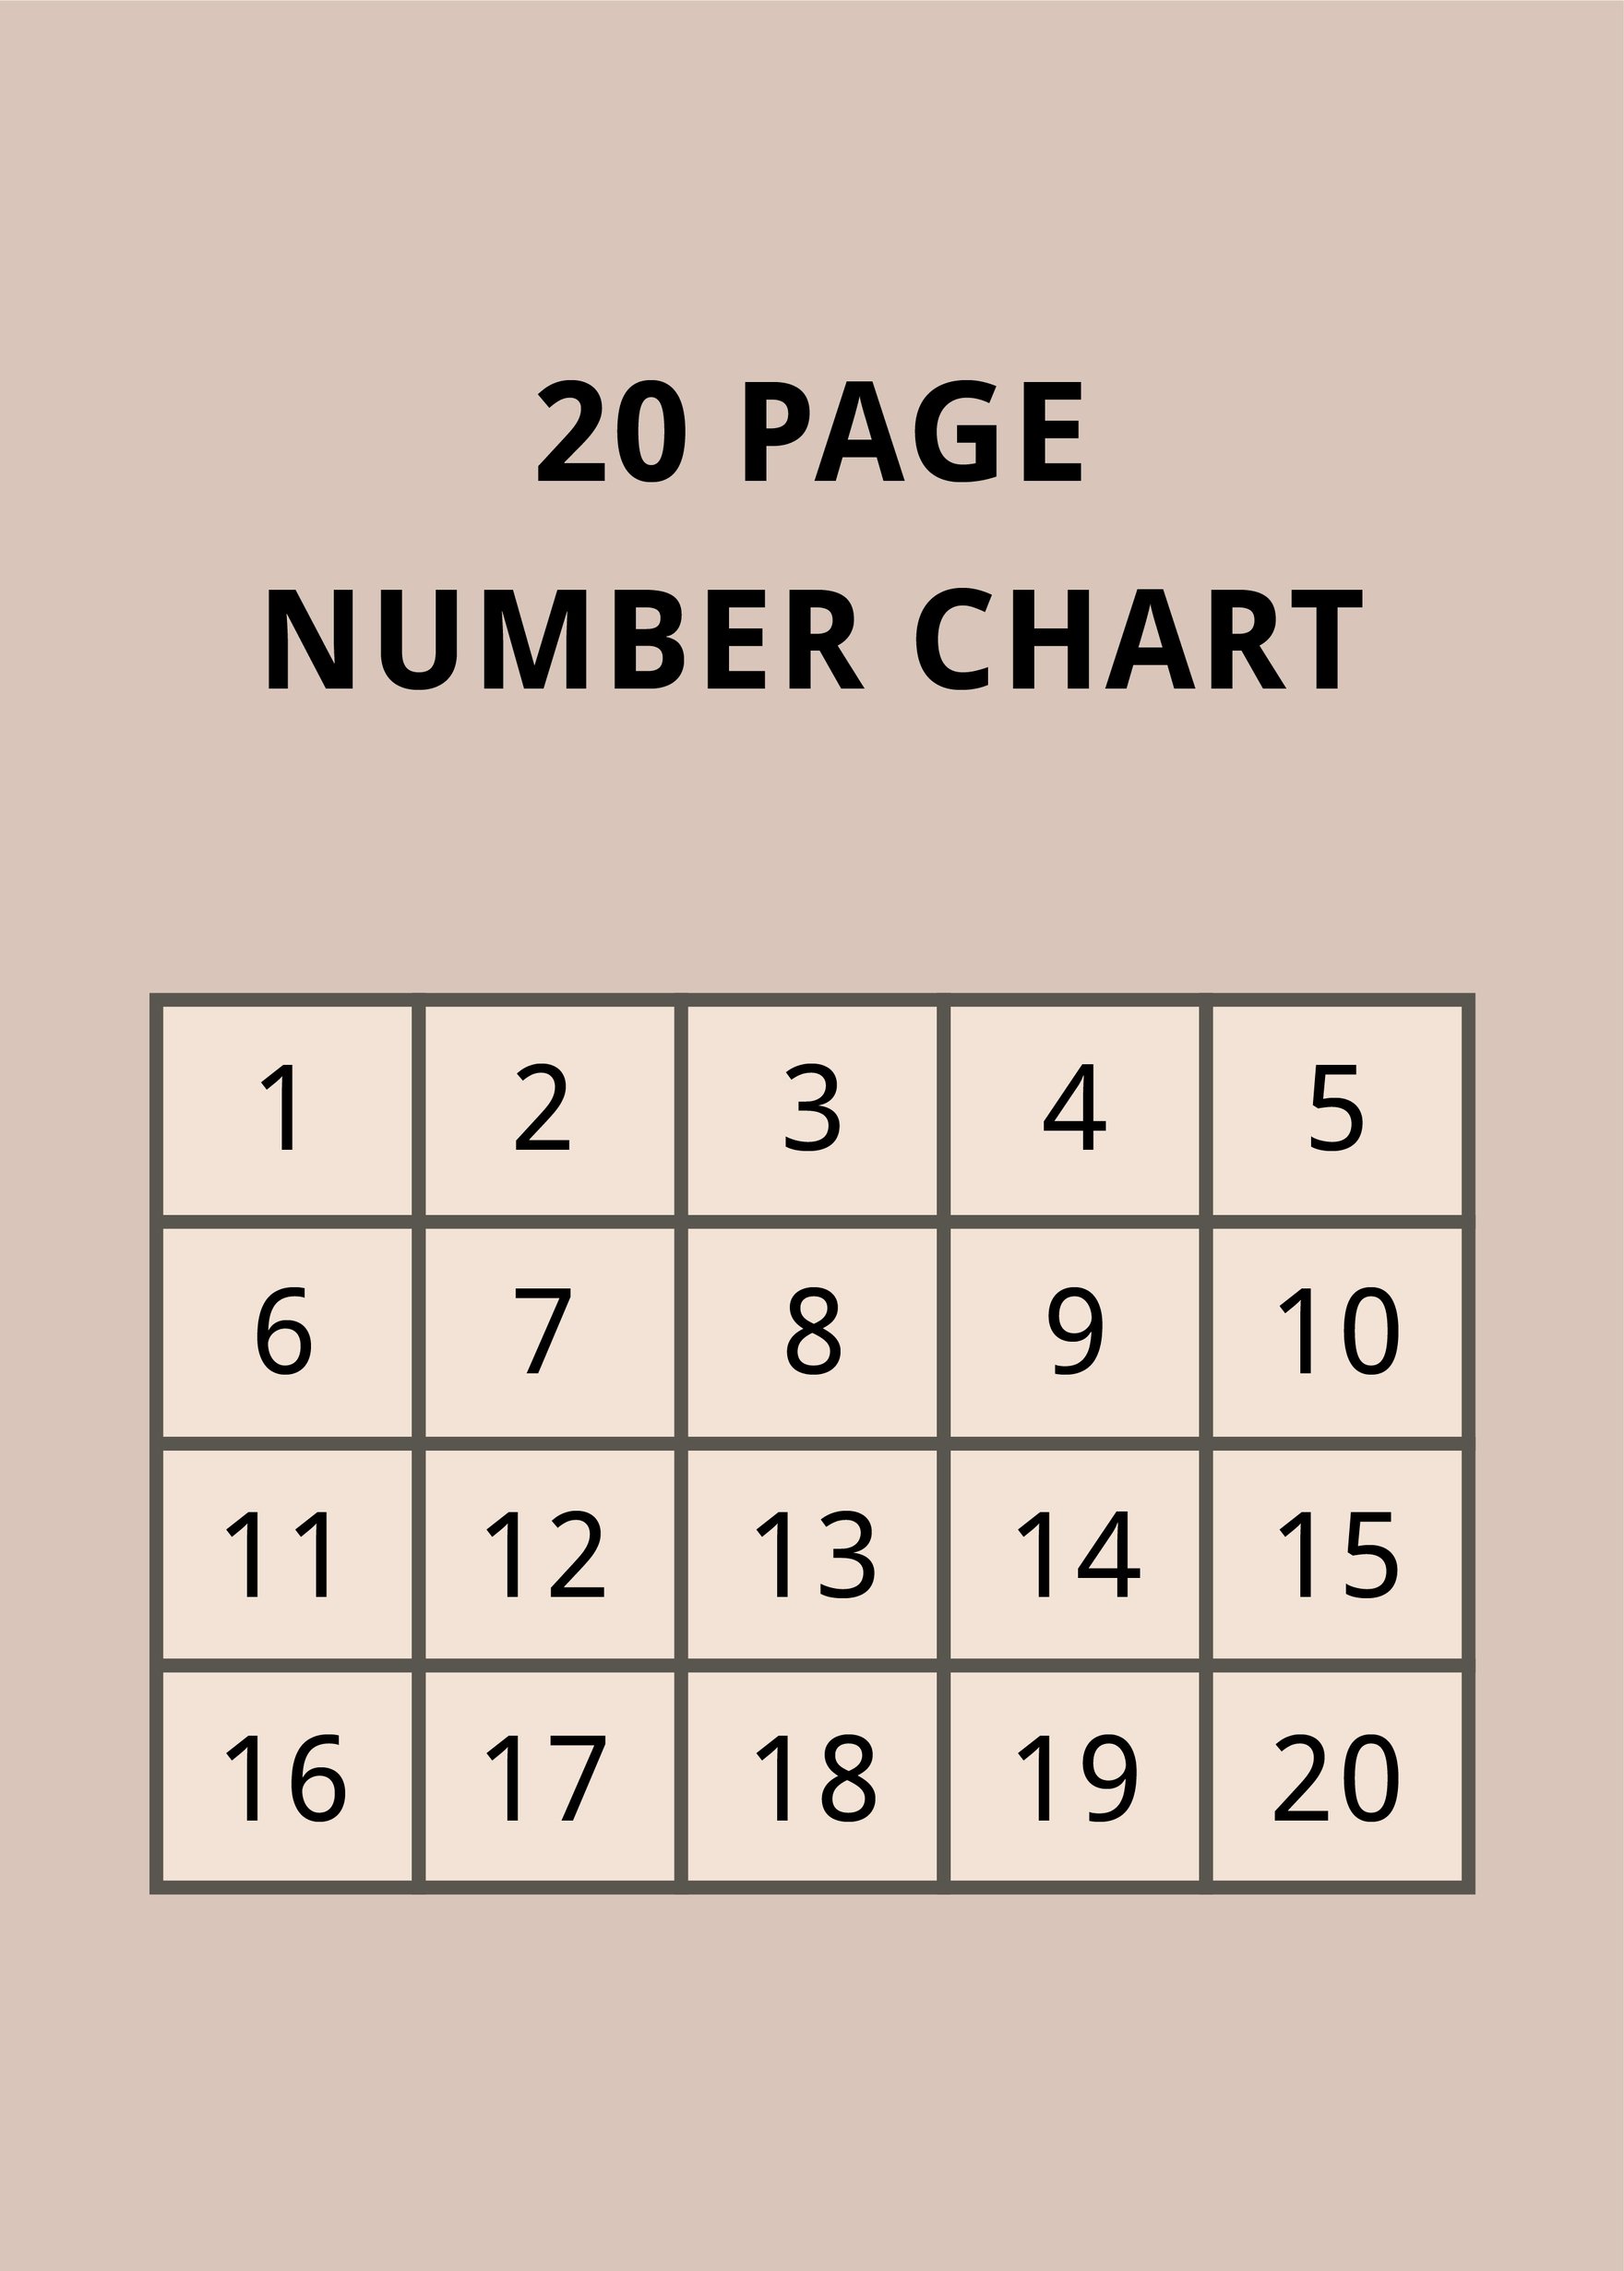 20 Page Number Chart